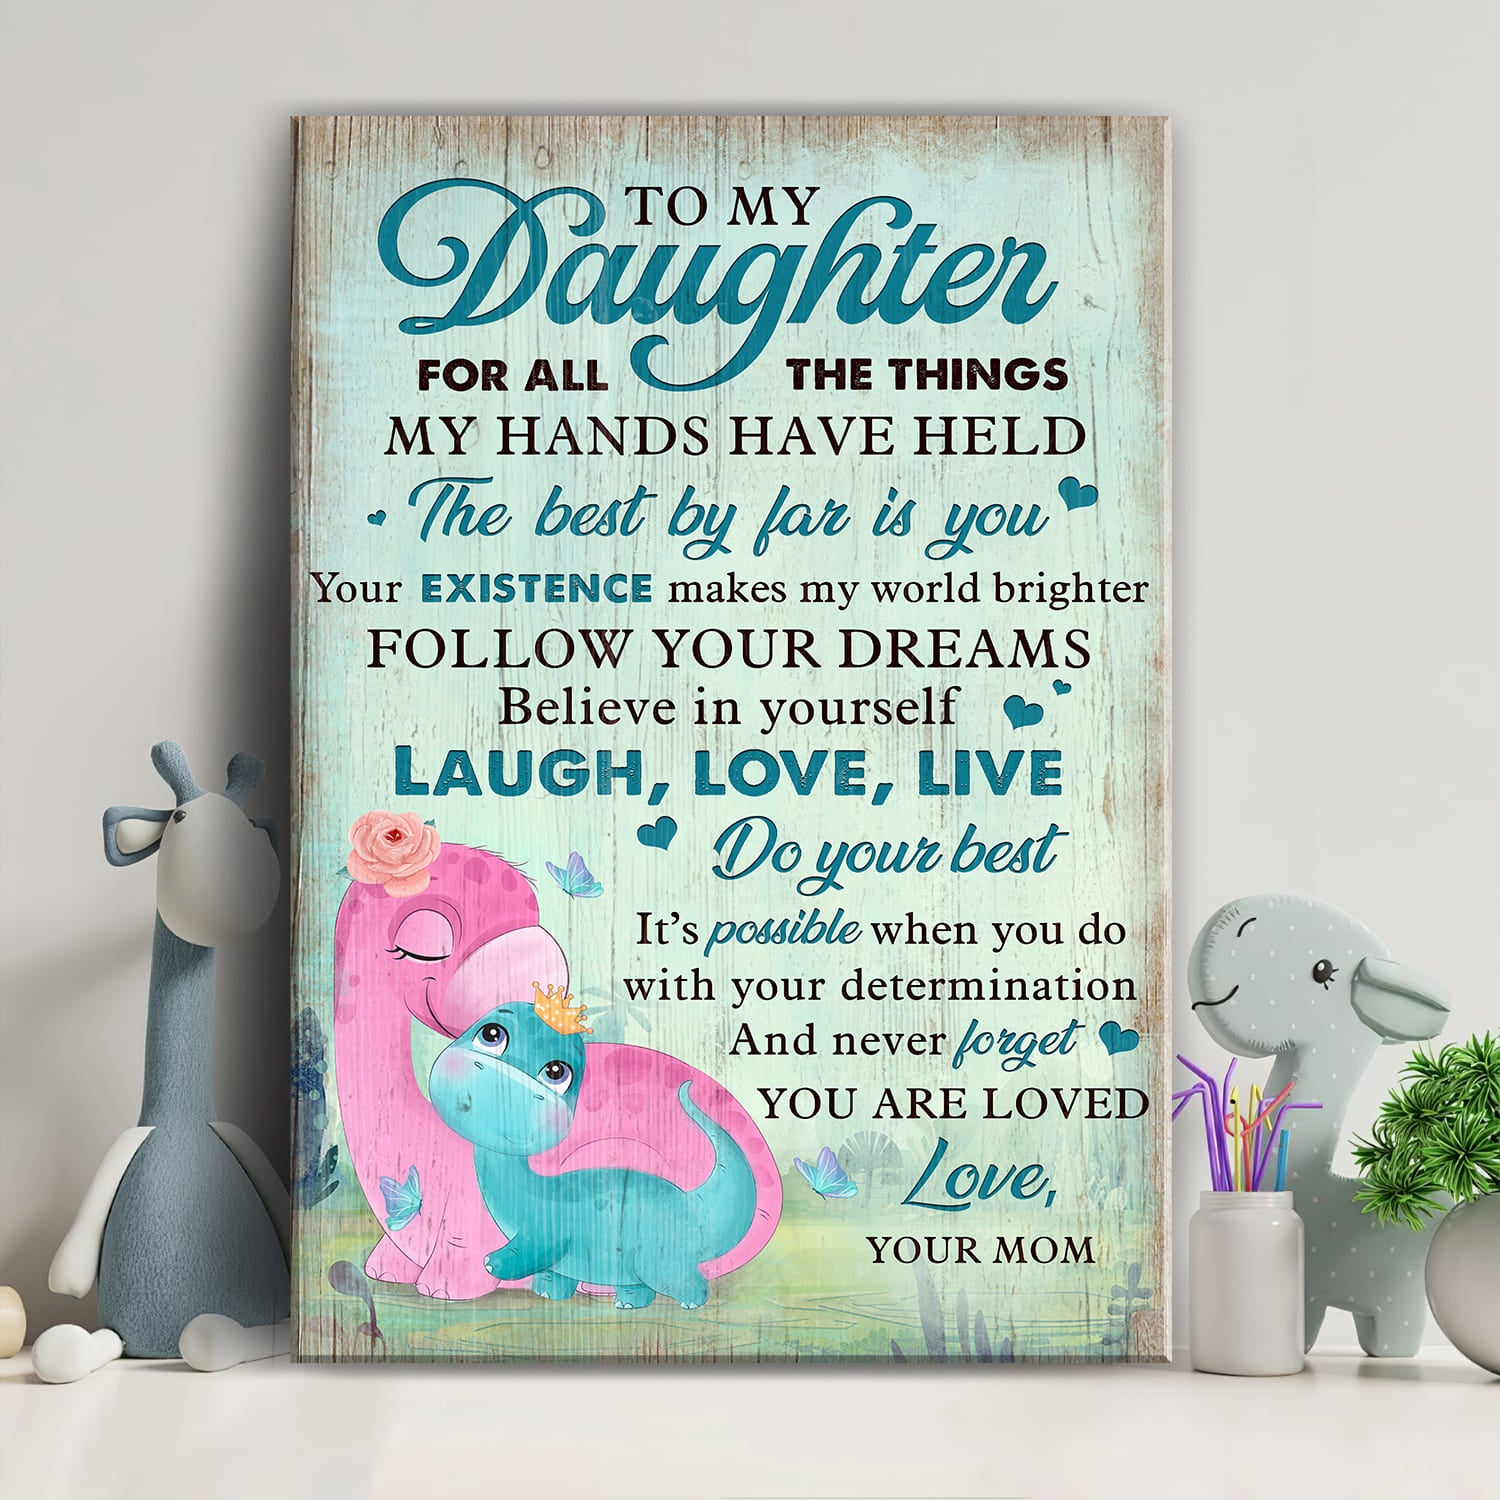 Mom to daughter, Dinosaur Family, The best by far is you - Family Portrait Canvas Prints, Wall Art